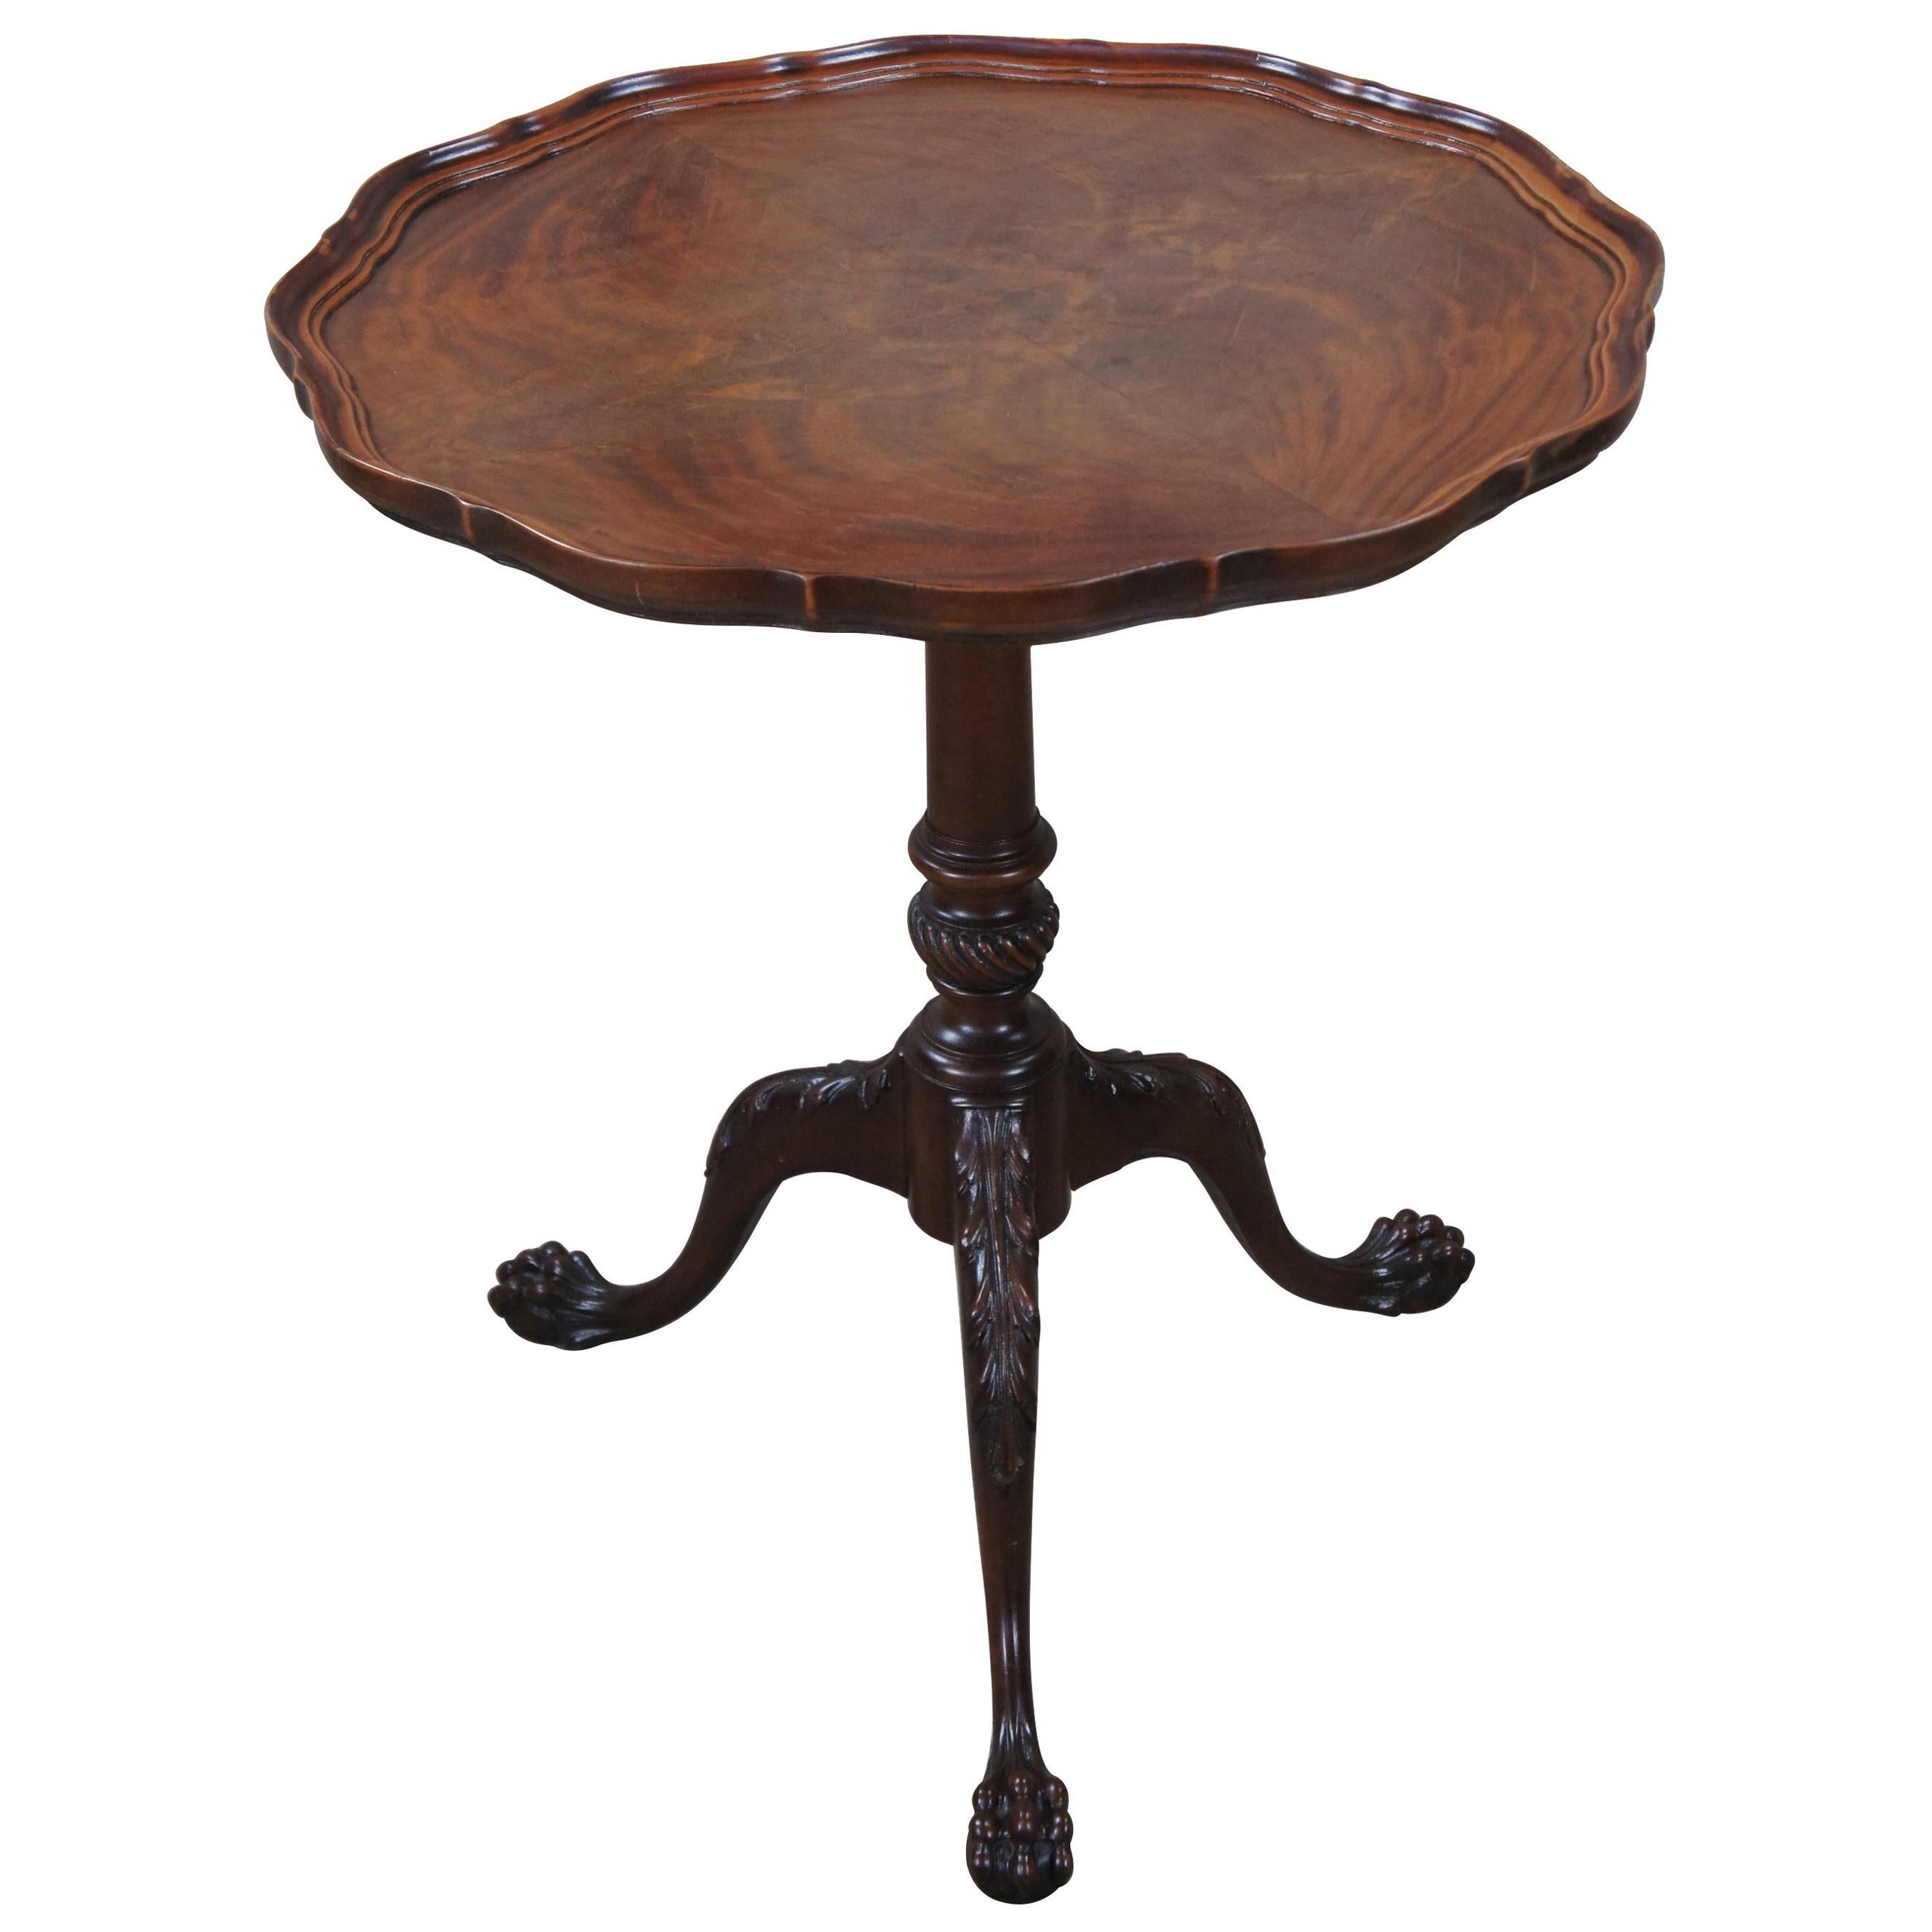 Antique Chippendale Flame Mahogany Pie Crust Ball & Claw Pedestal Tea Table 